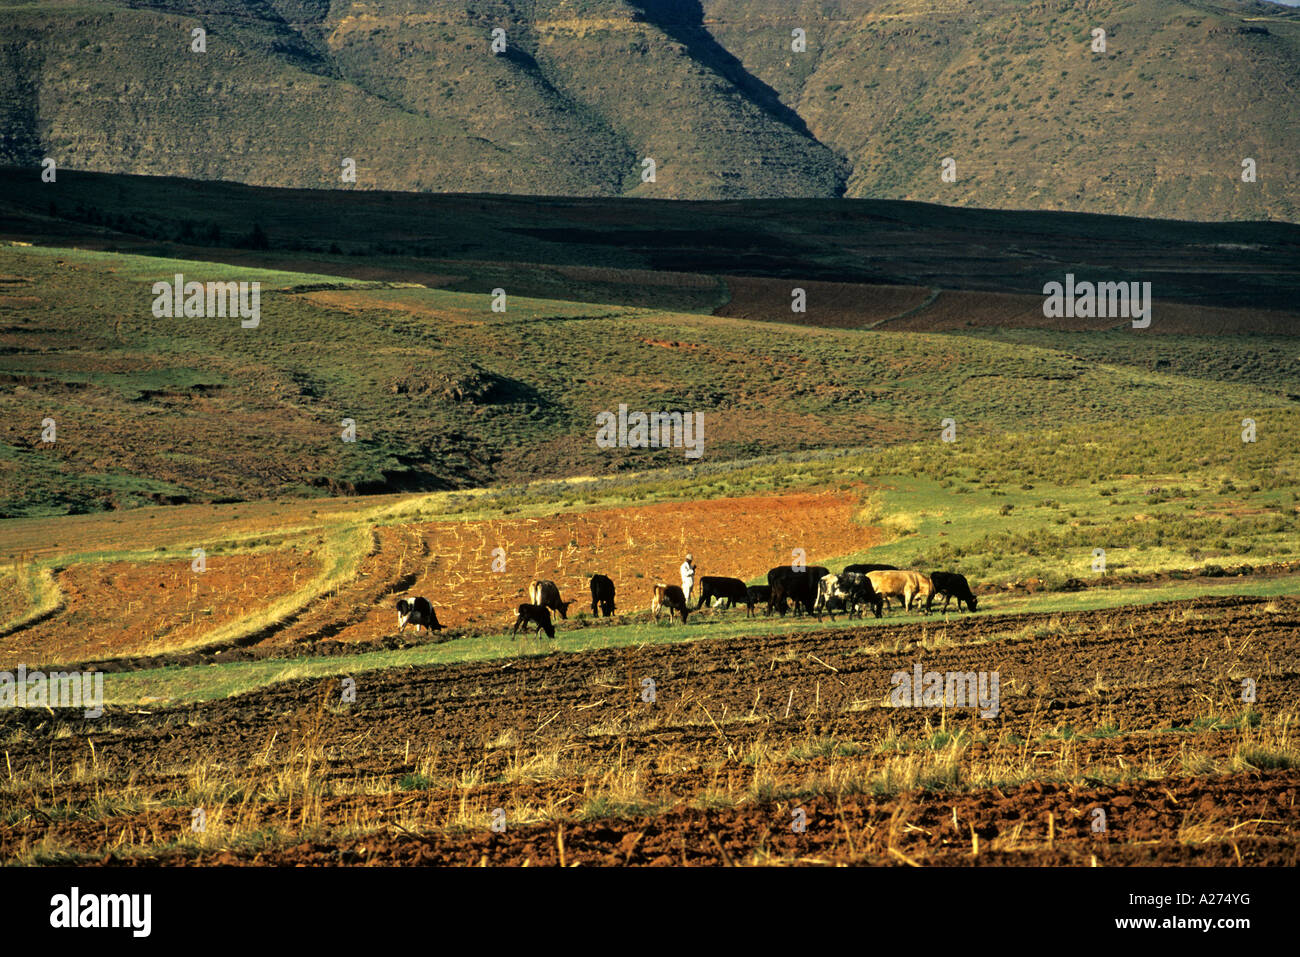 Shepherd with cattle in the Maluti mountains, Lesotho, Africa Stock Photo